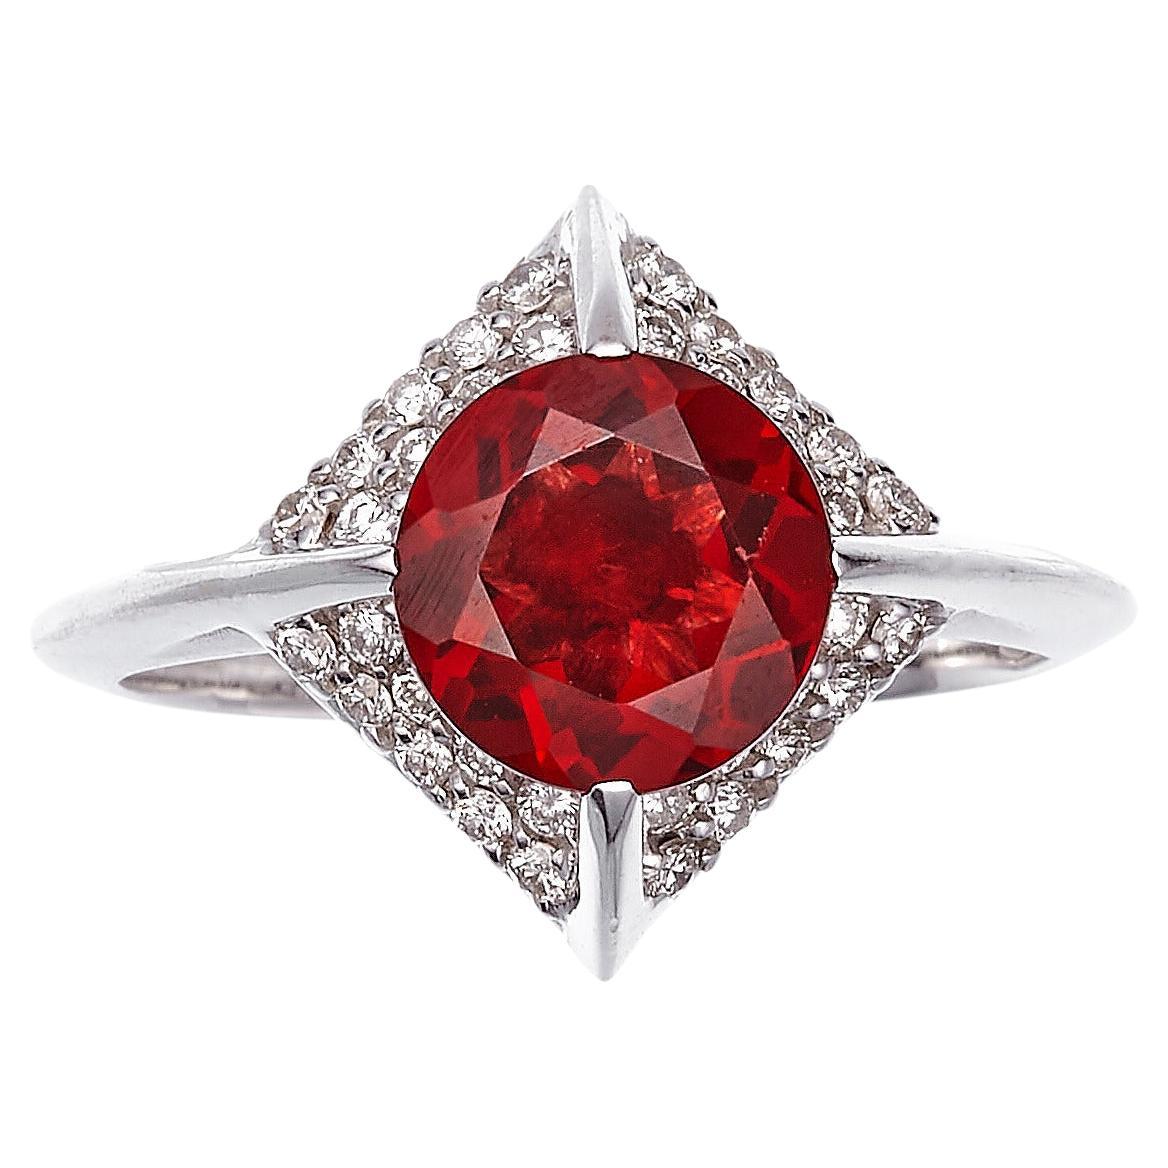 For Sale:  18K White Gold Made in Italy Diamond Rodolite Garnet Vogue Awarded Cocktail Ring